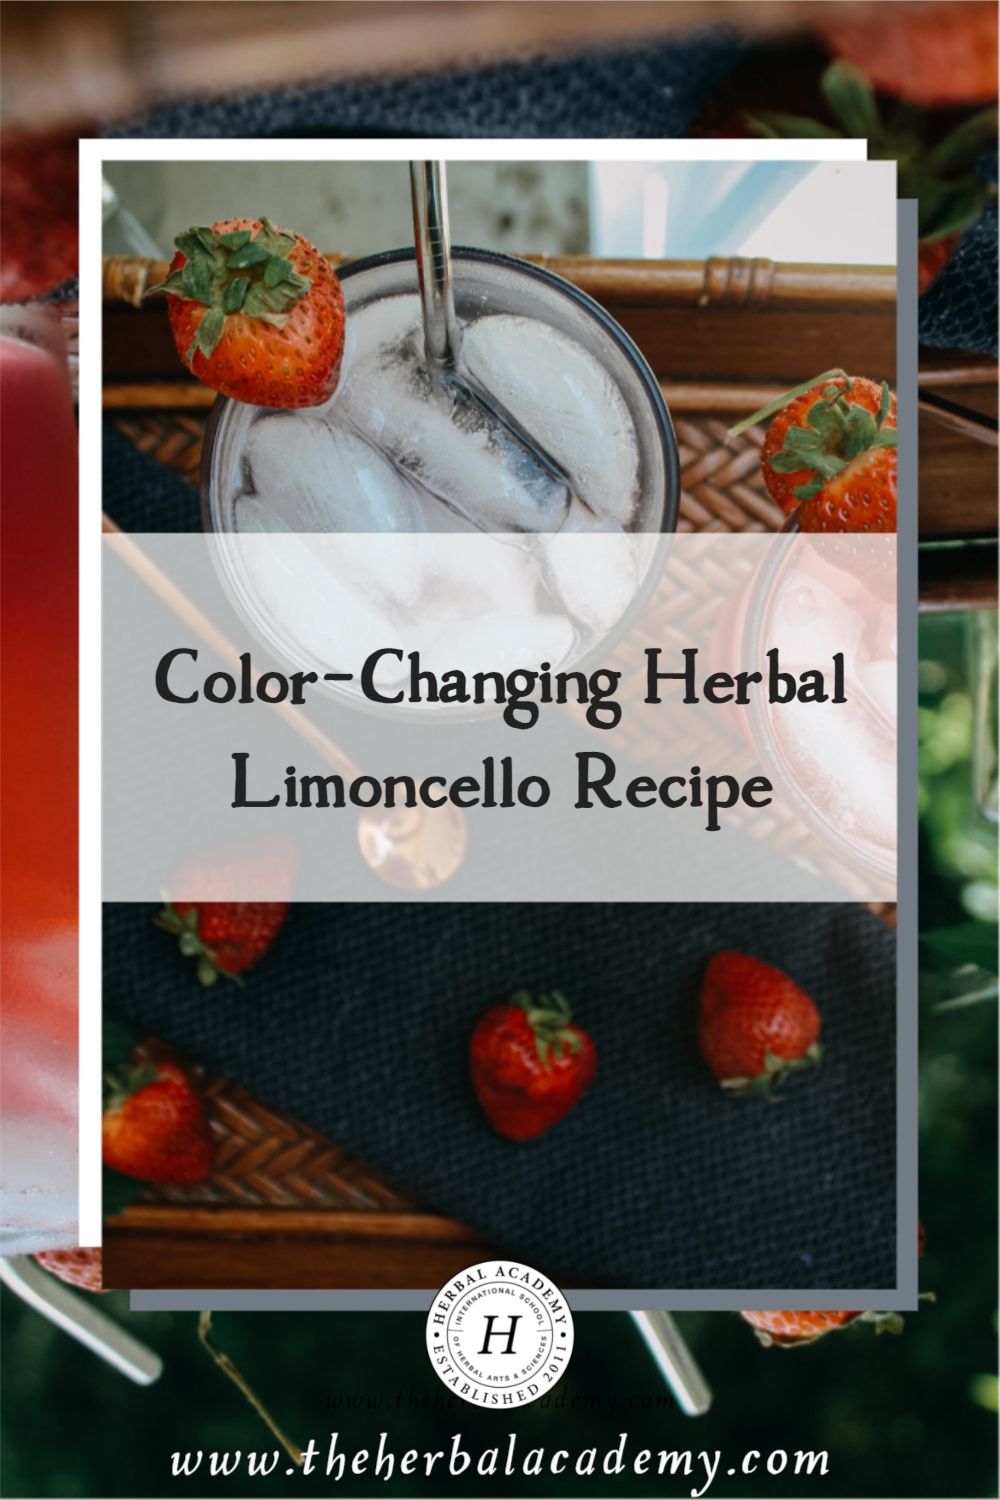 Color-Changing Herbal Limoncello Recipe | Herbal Academy | This fun limoncello recipe is great to serve in front of an audience because it magically changes colors with the addition of lemon juice!